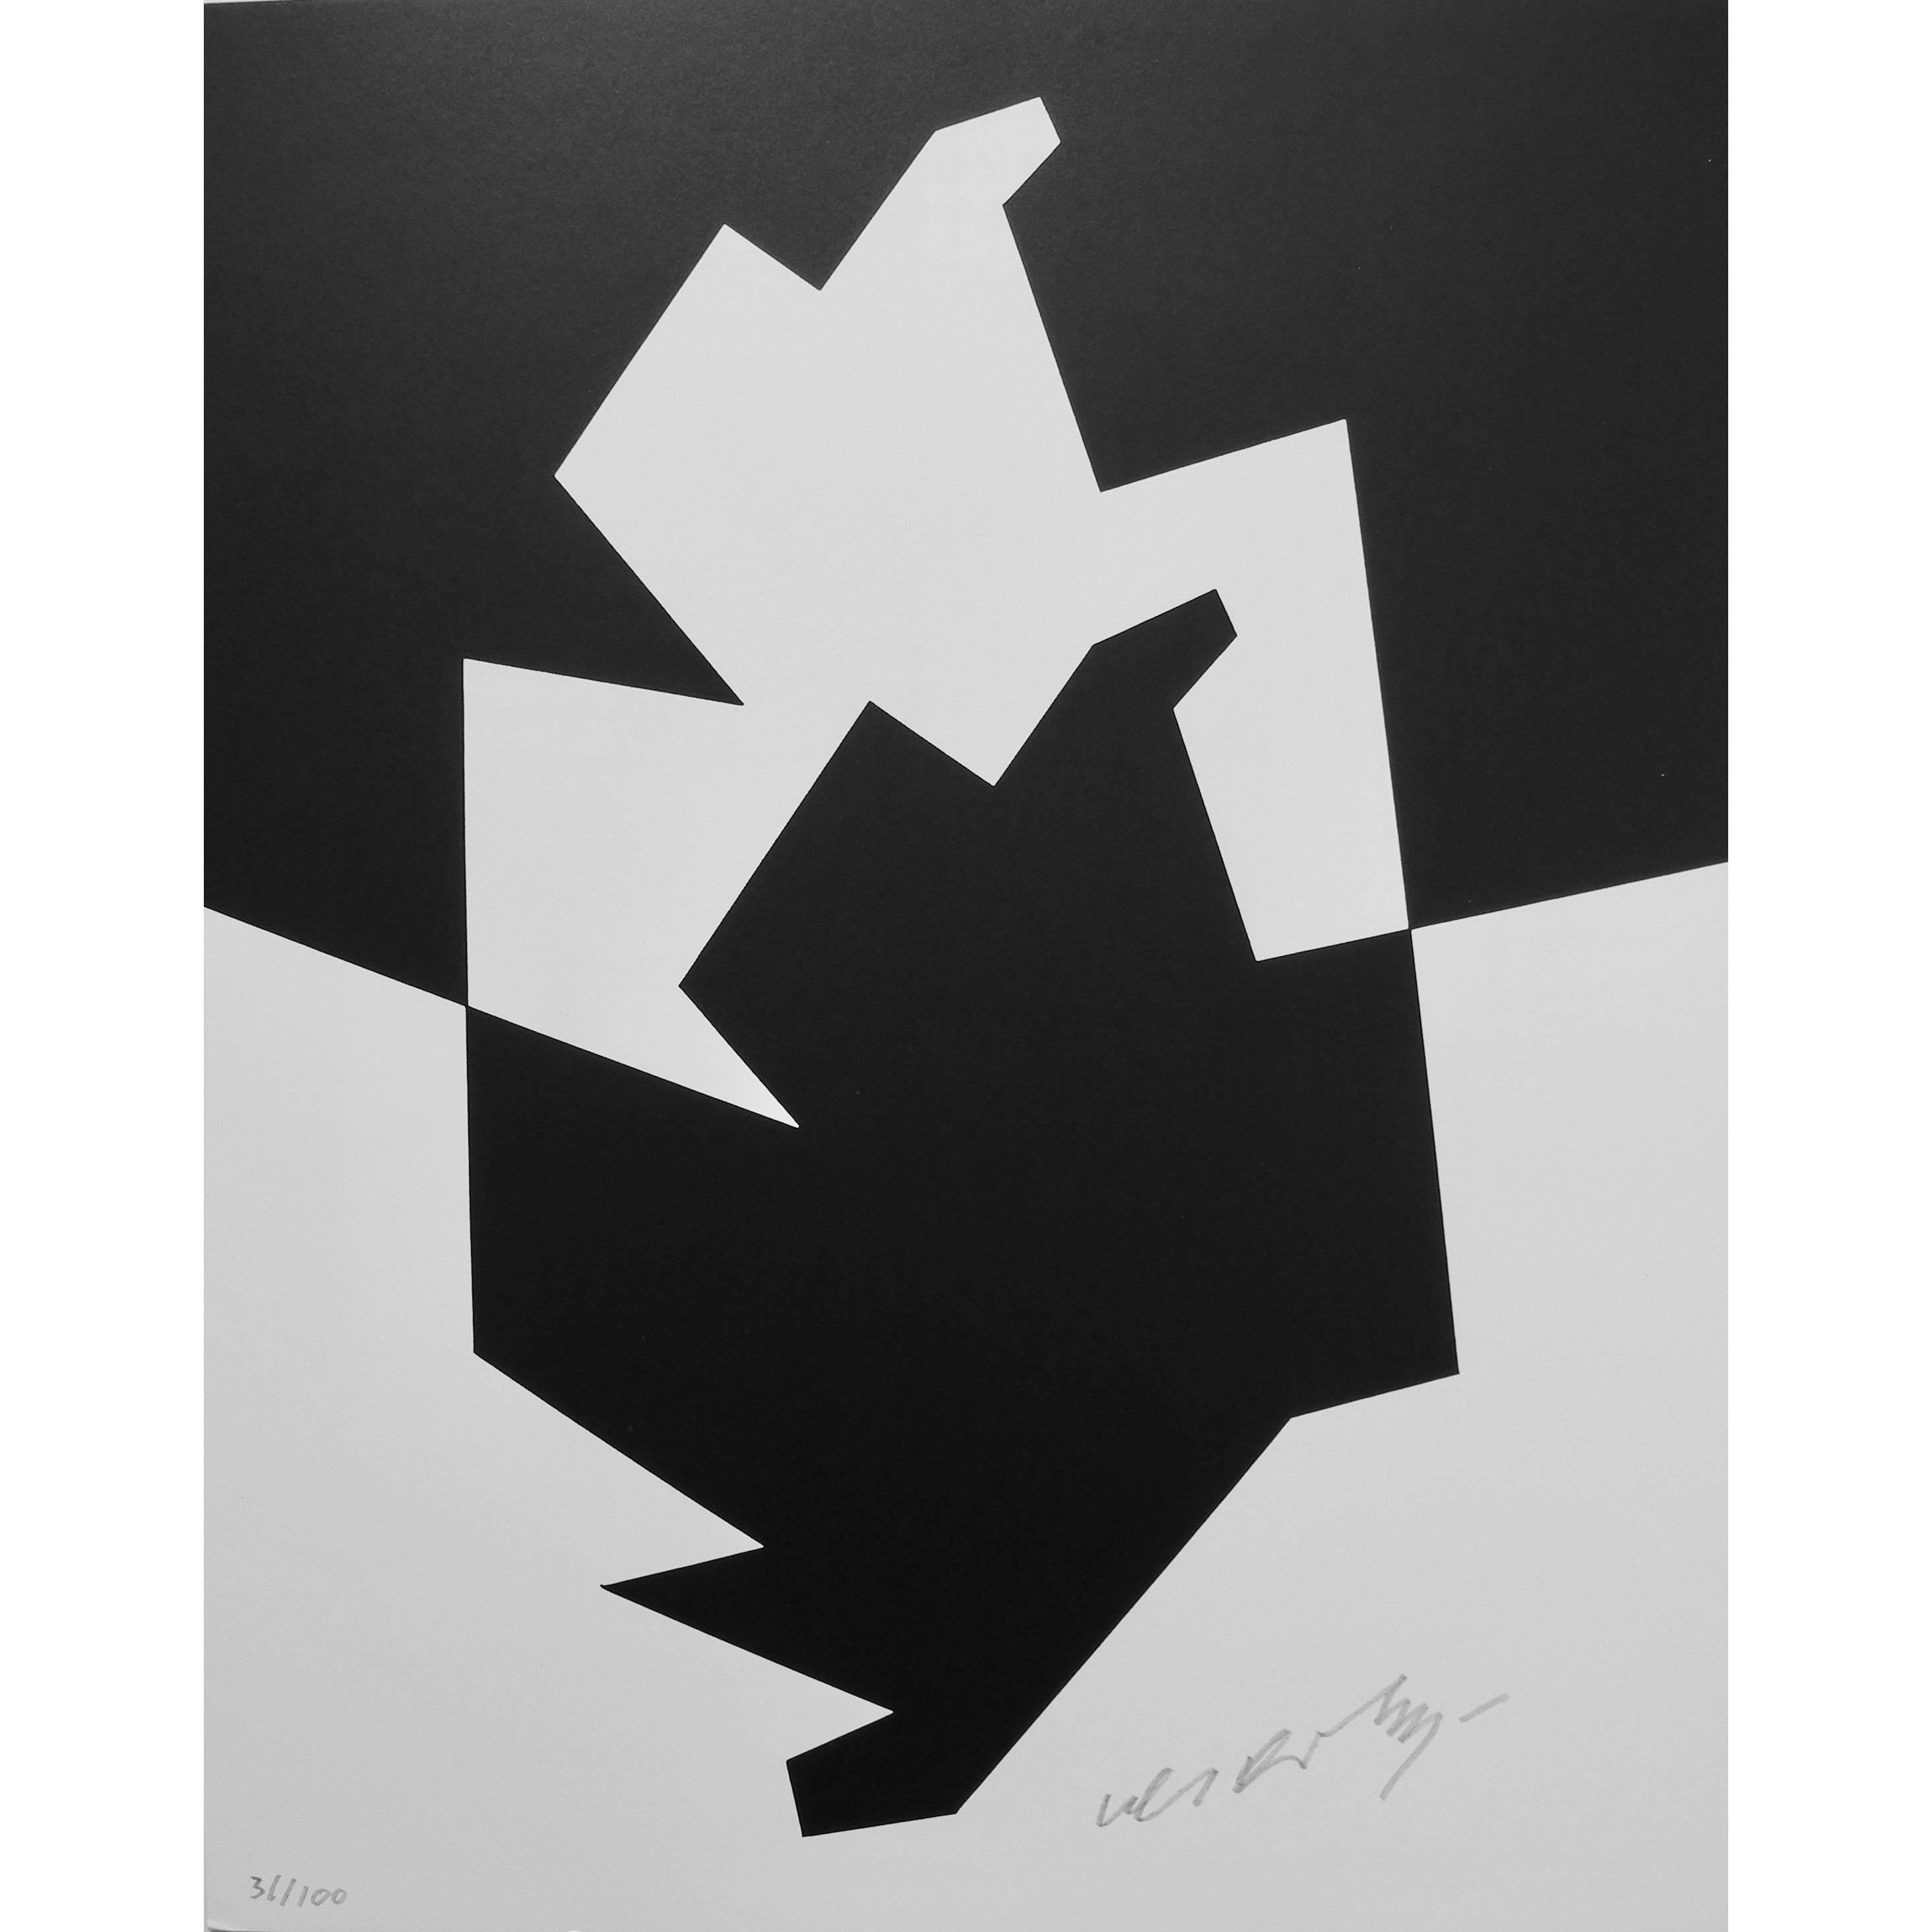 Black and White Lithograph/Screen Print Titled Uzok by Victor Vasarely, 1973 For Sale